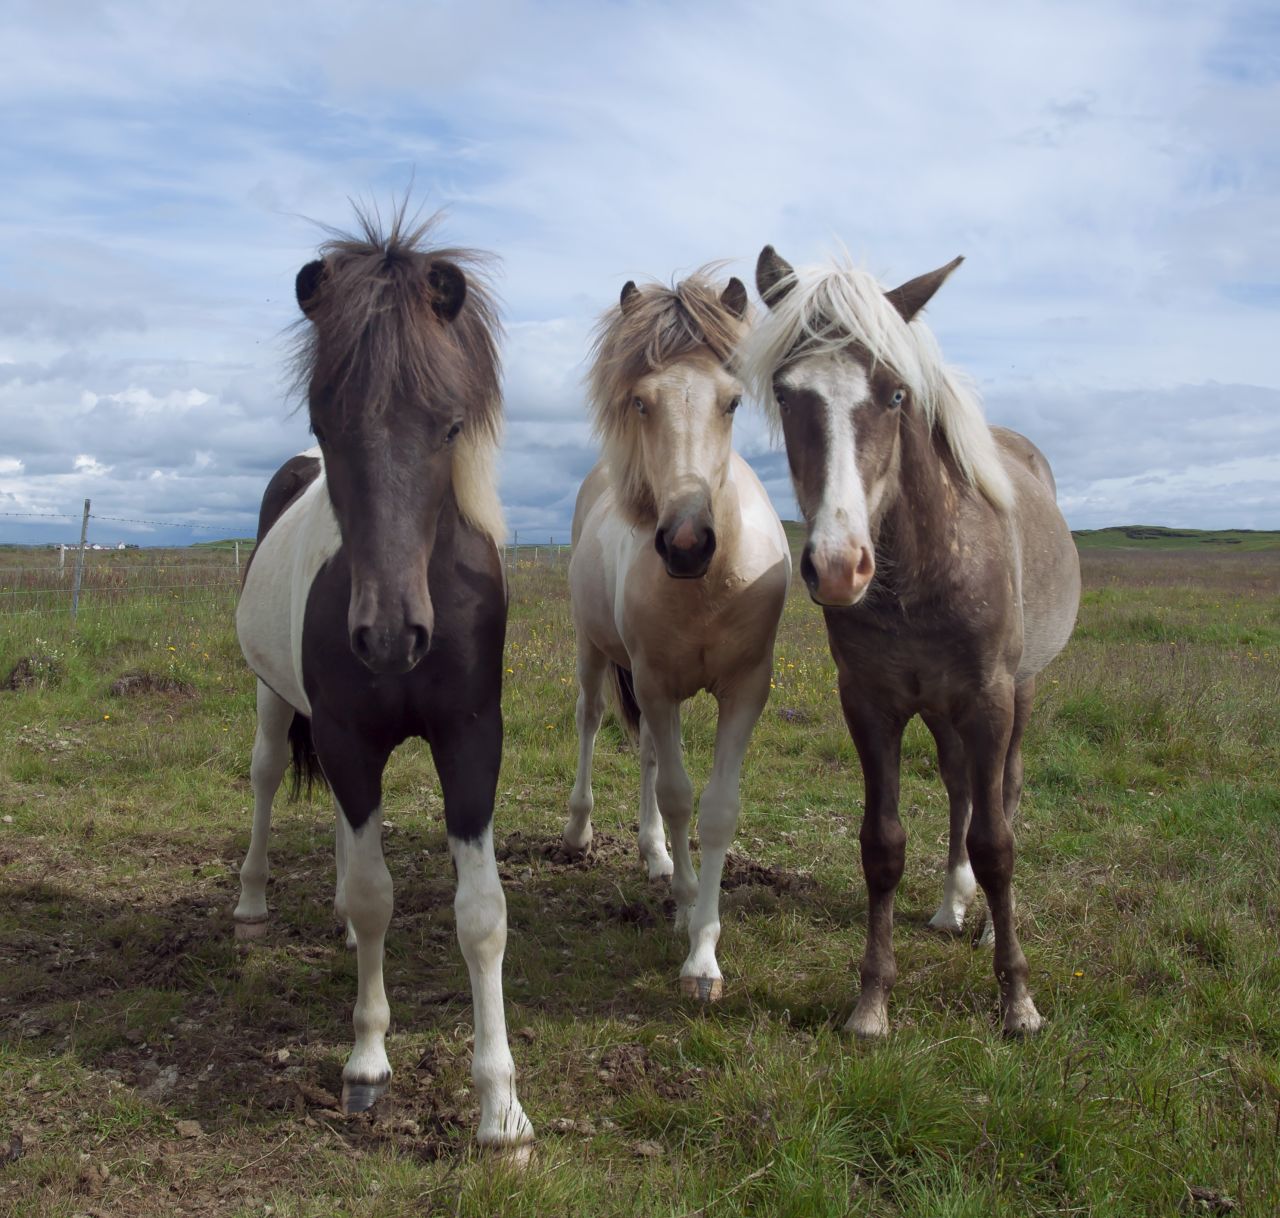 But attending an Icelandic horse show is more than just attending a sporting event. The action on the track being just one part of a weekend that sees spectators pitch up tents and park their caravans, while their own Icelandic horses mingle with others in the surrounding fields.